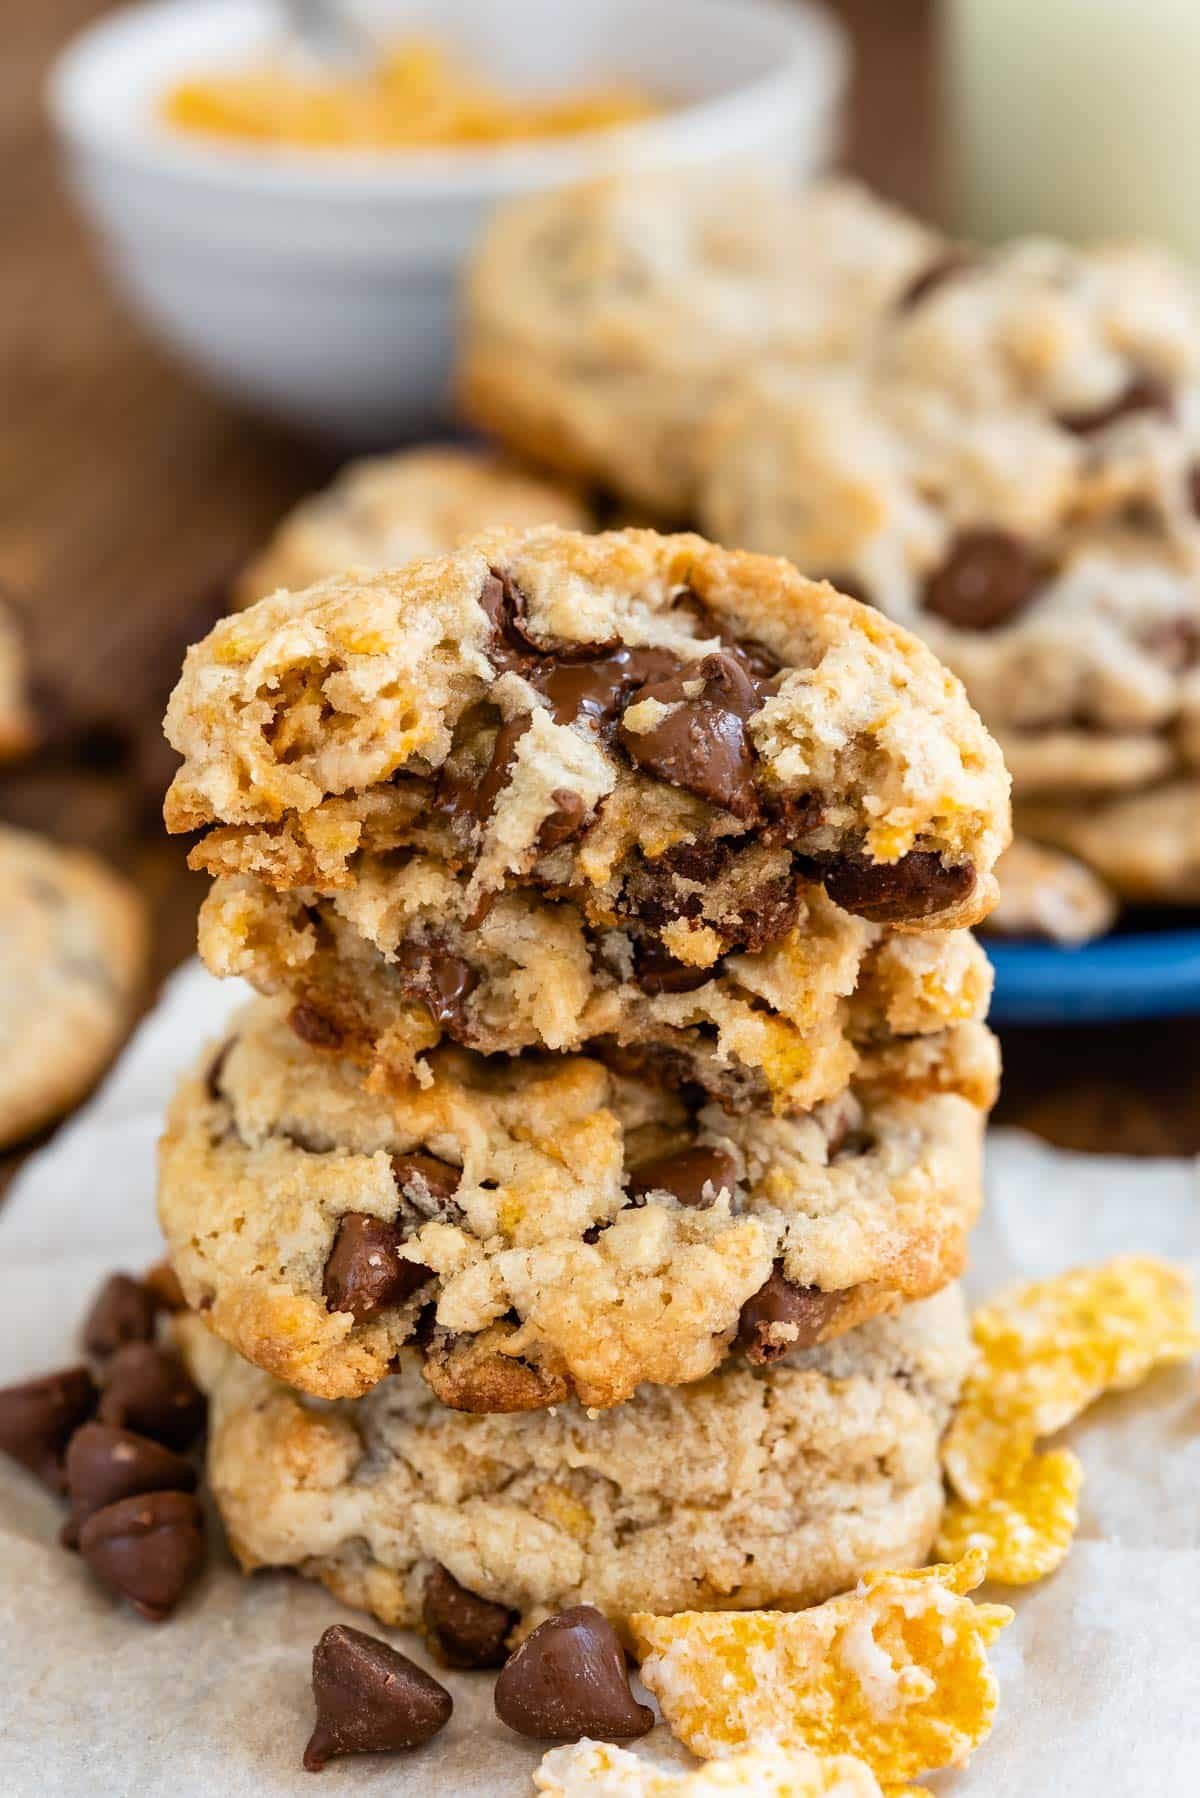 stacked frosted flake cookies with chocolate chips baked in